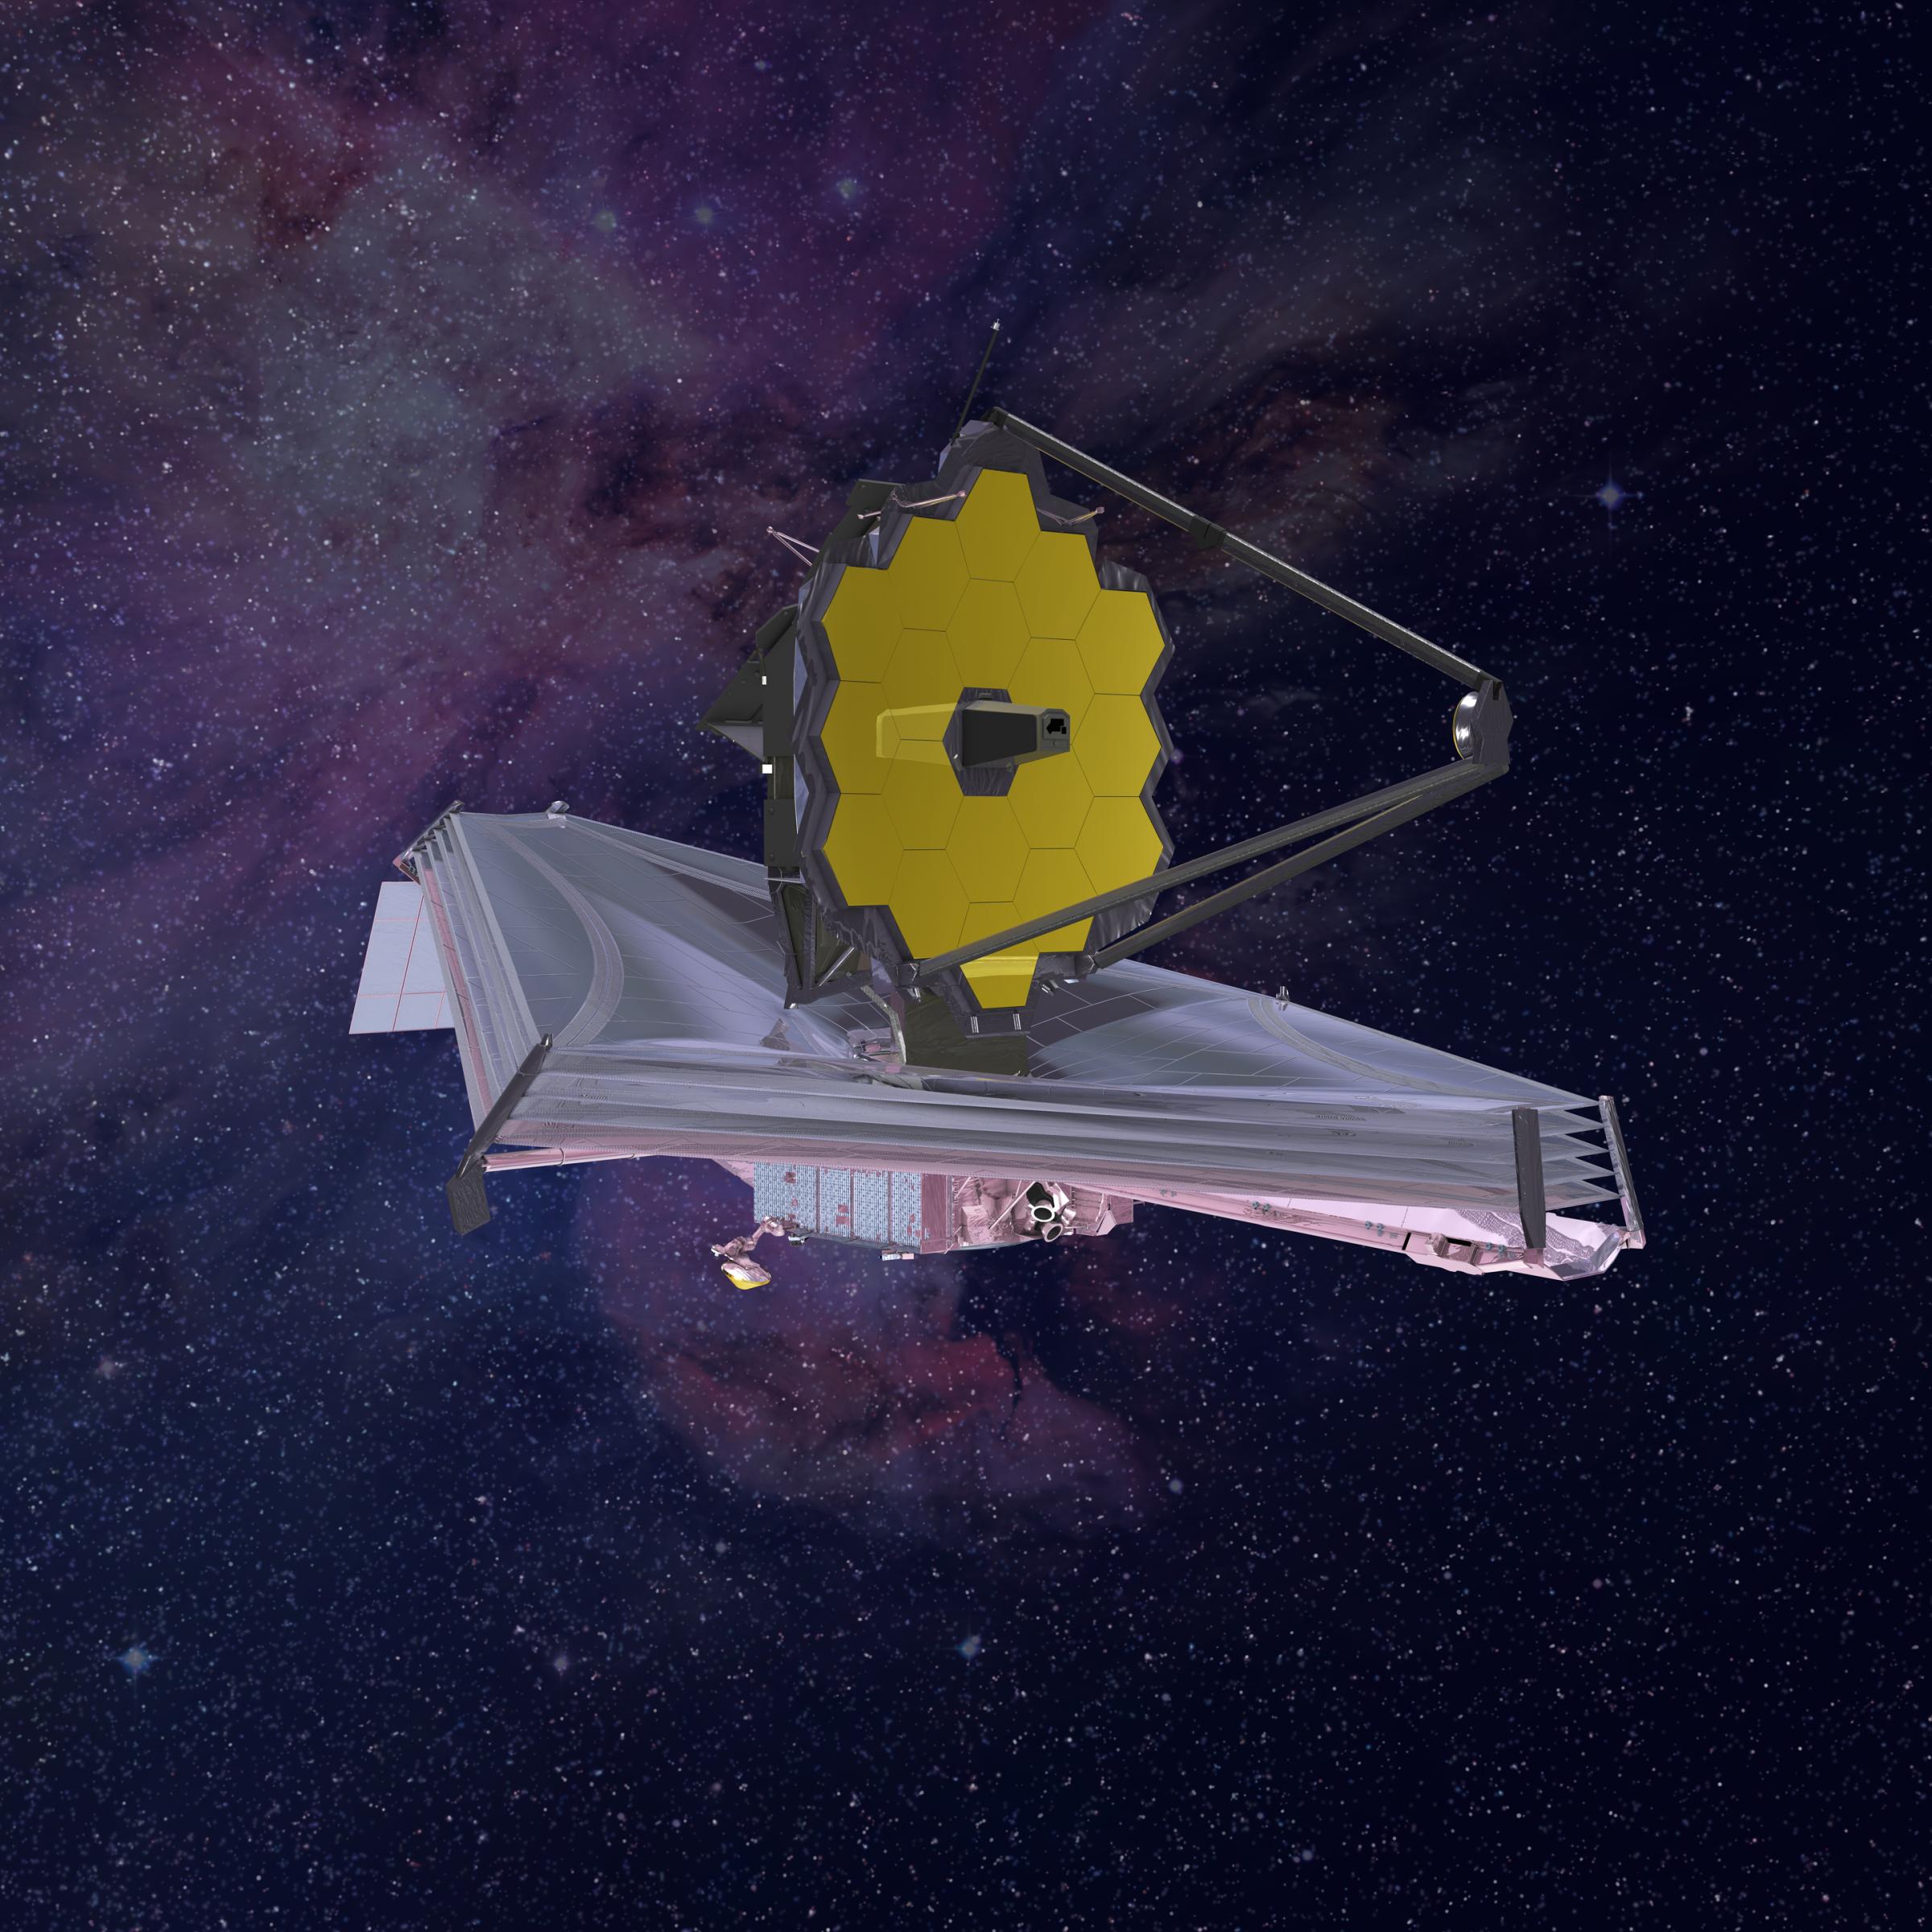 This rendering of the James Webb Space Telescope is current to 2015. Upon request we can provide a high-resolution image without a background. Image credit: Northrop Grumman